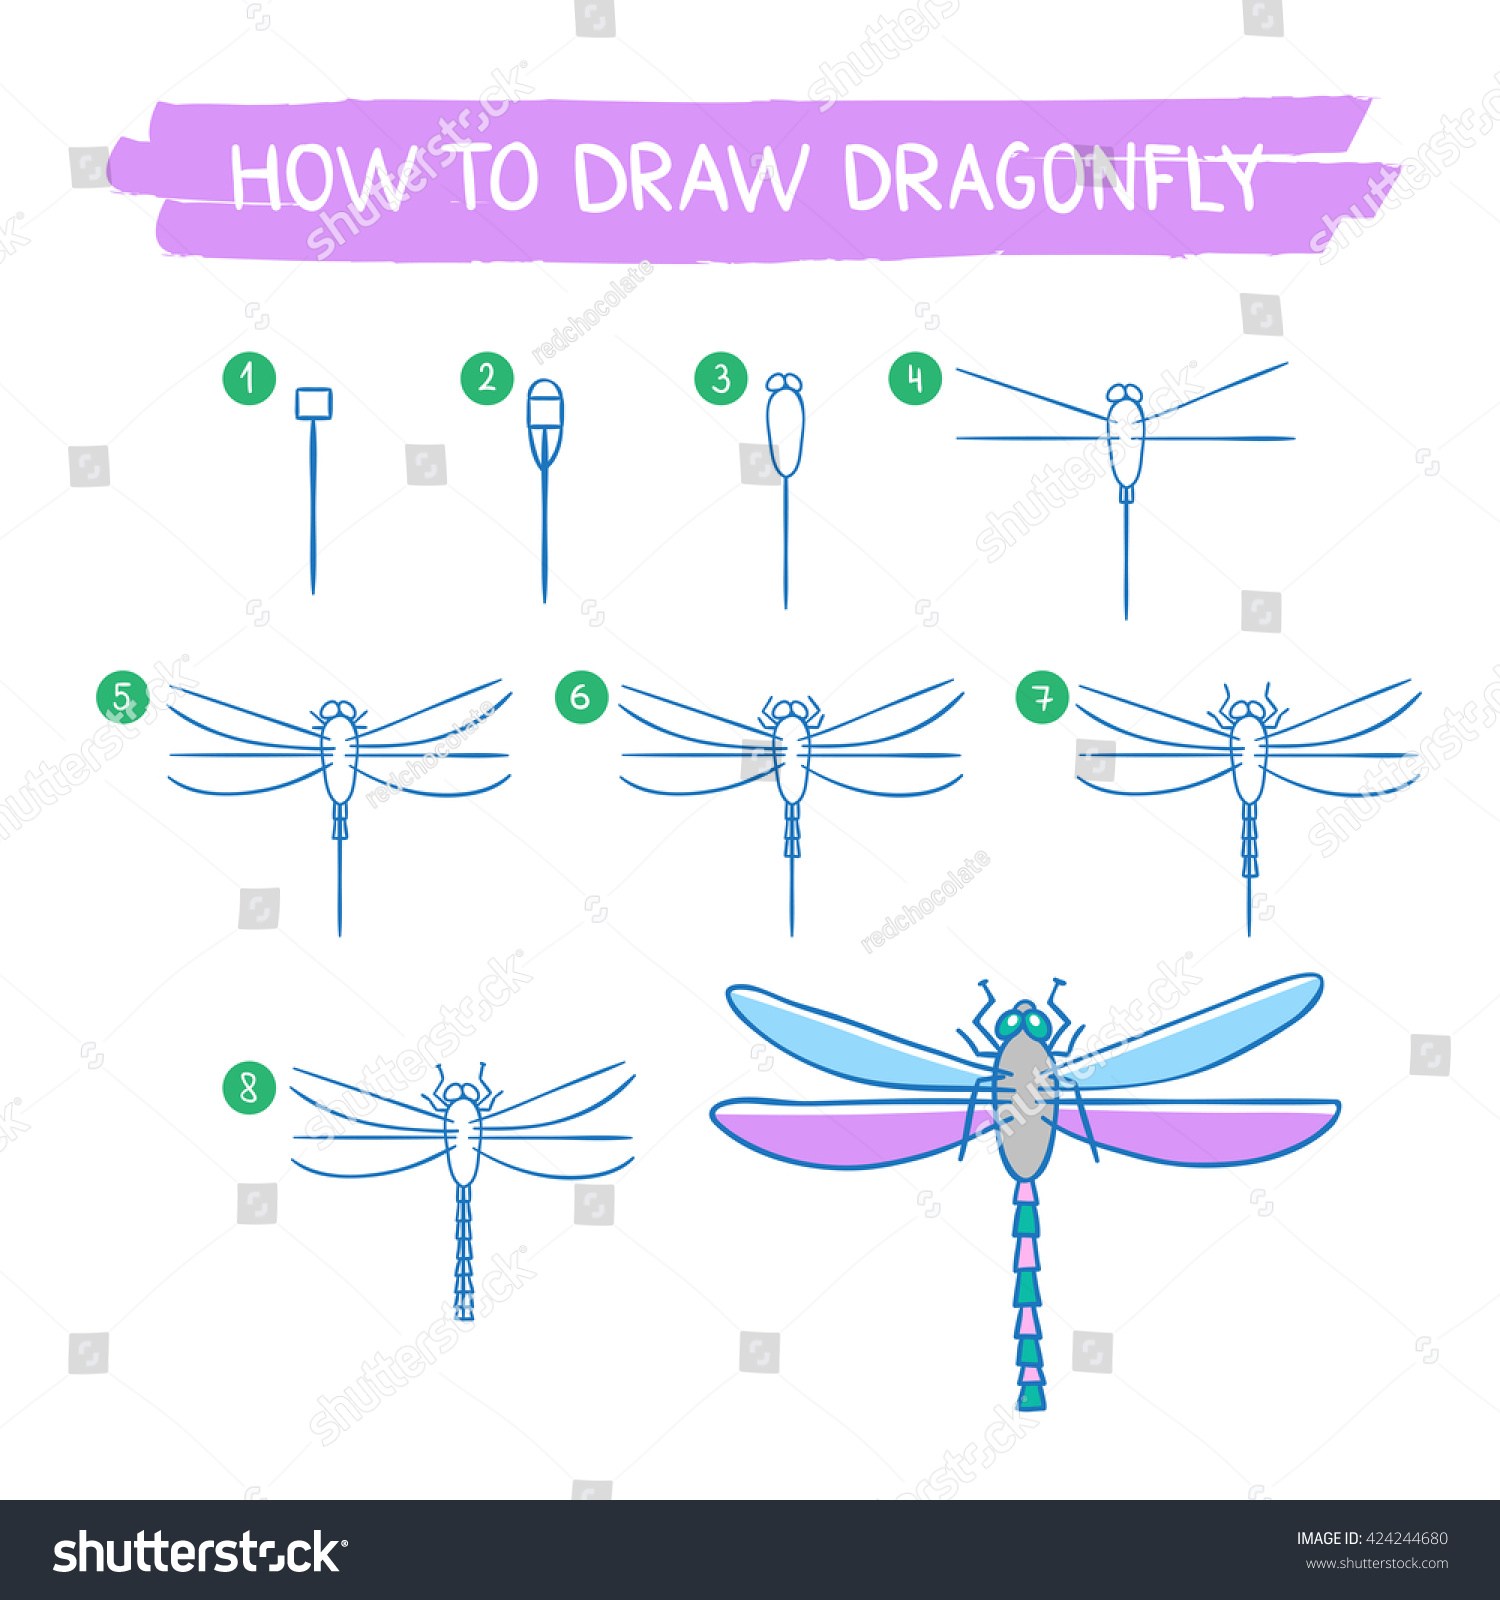 Dragonfly Drawing Tutorial How Draw Dragonfly Stock Vector (Royalty